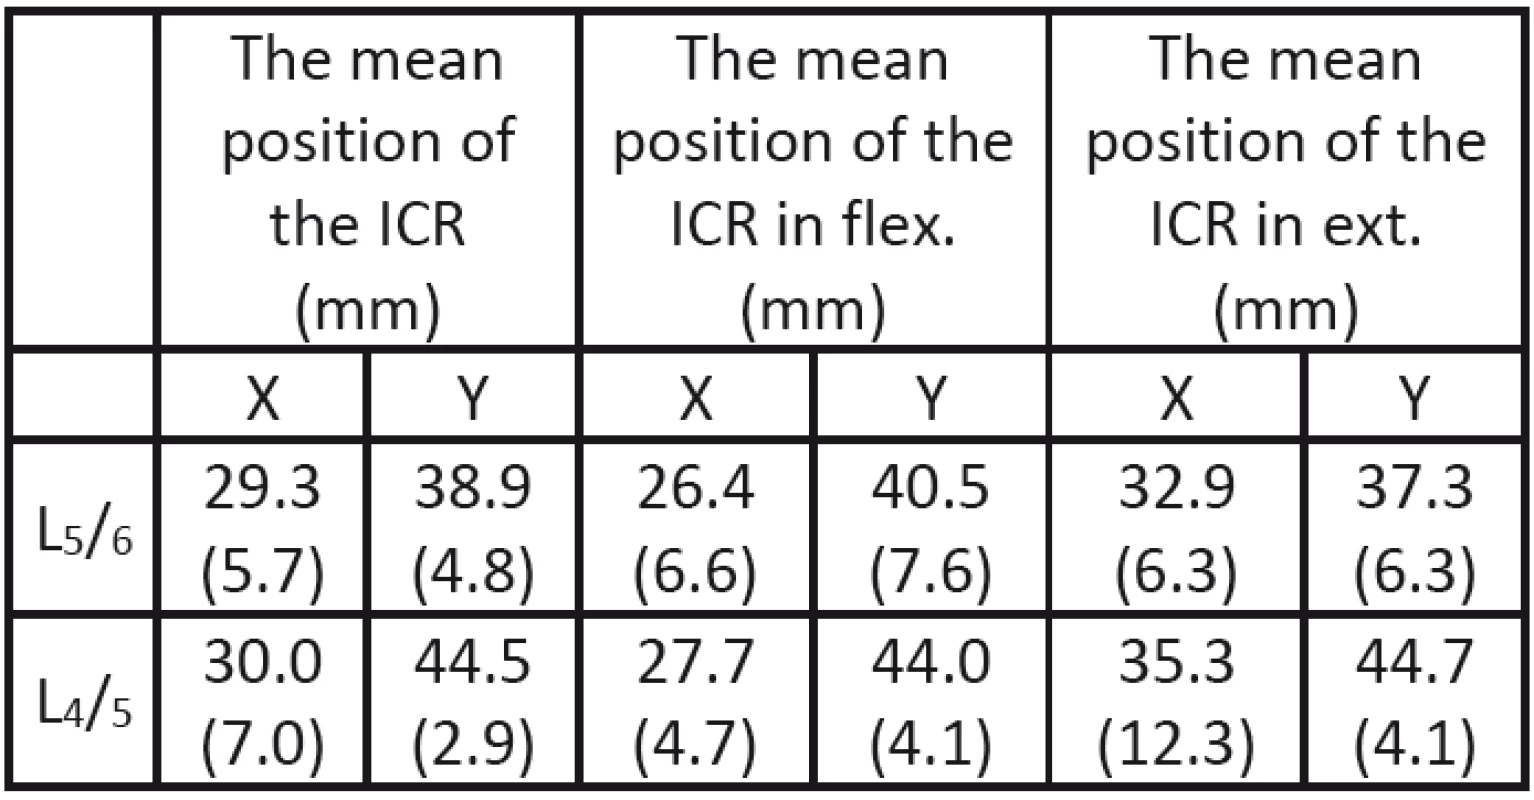 The mean values of positions of the ICR.